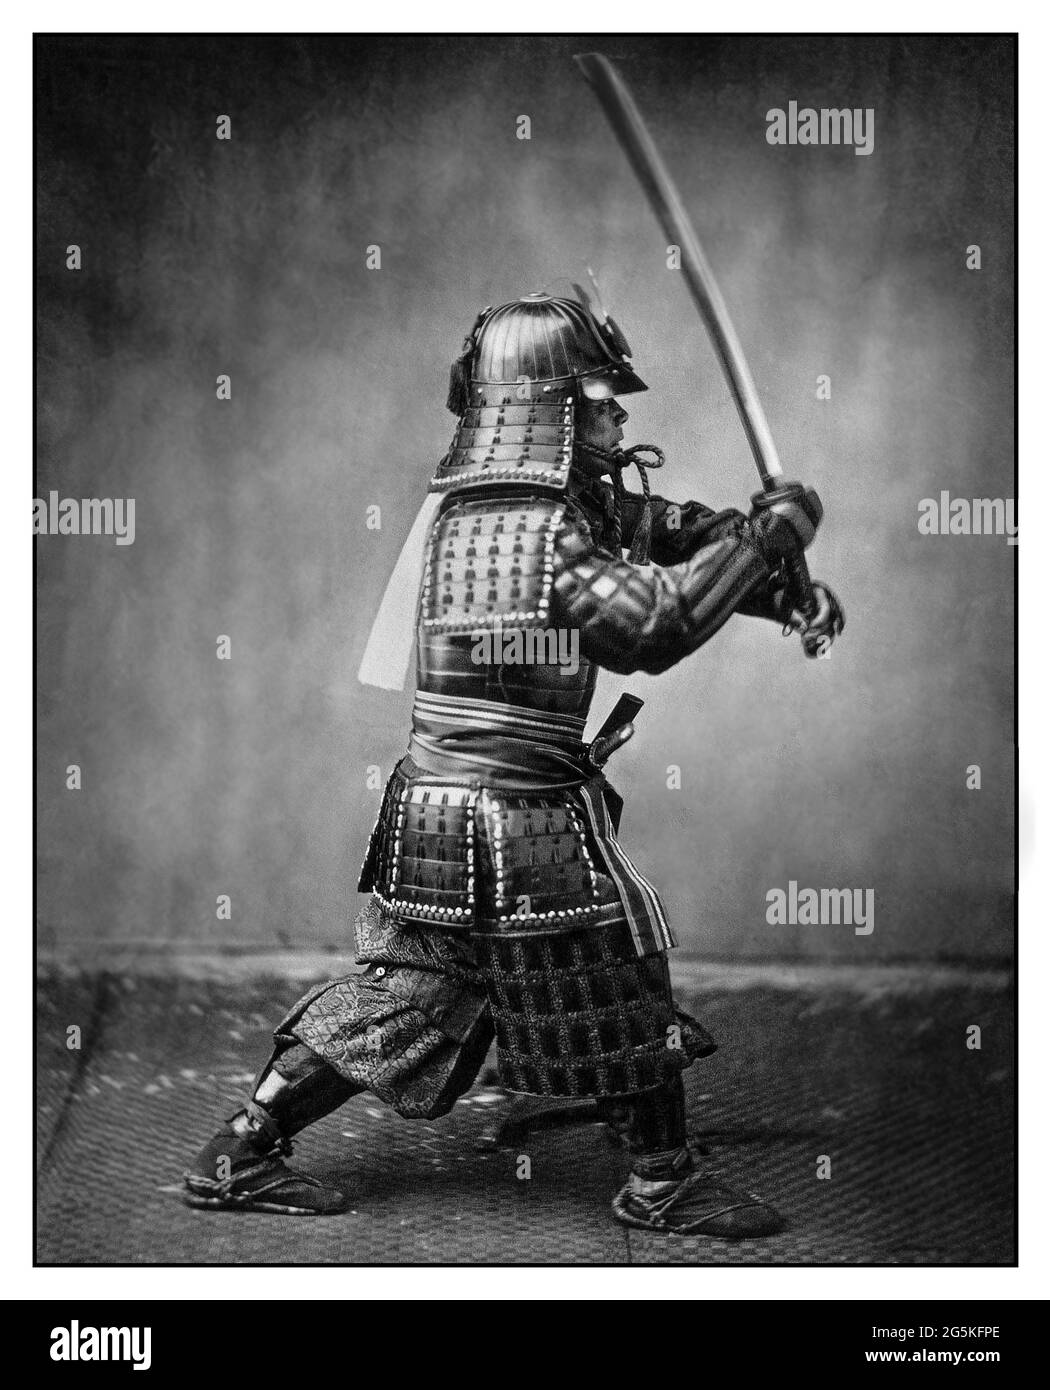 SAMURAI WARRIOR 1860's Traditional Japanese Samurai in armour brandishing Sword by Felice Beato Samurai were the hereditary military nobility and officer caste of medieval and early-modern Japan from the late 12th century to their abolition in 1876. Stock Photo